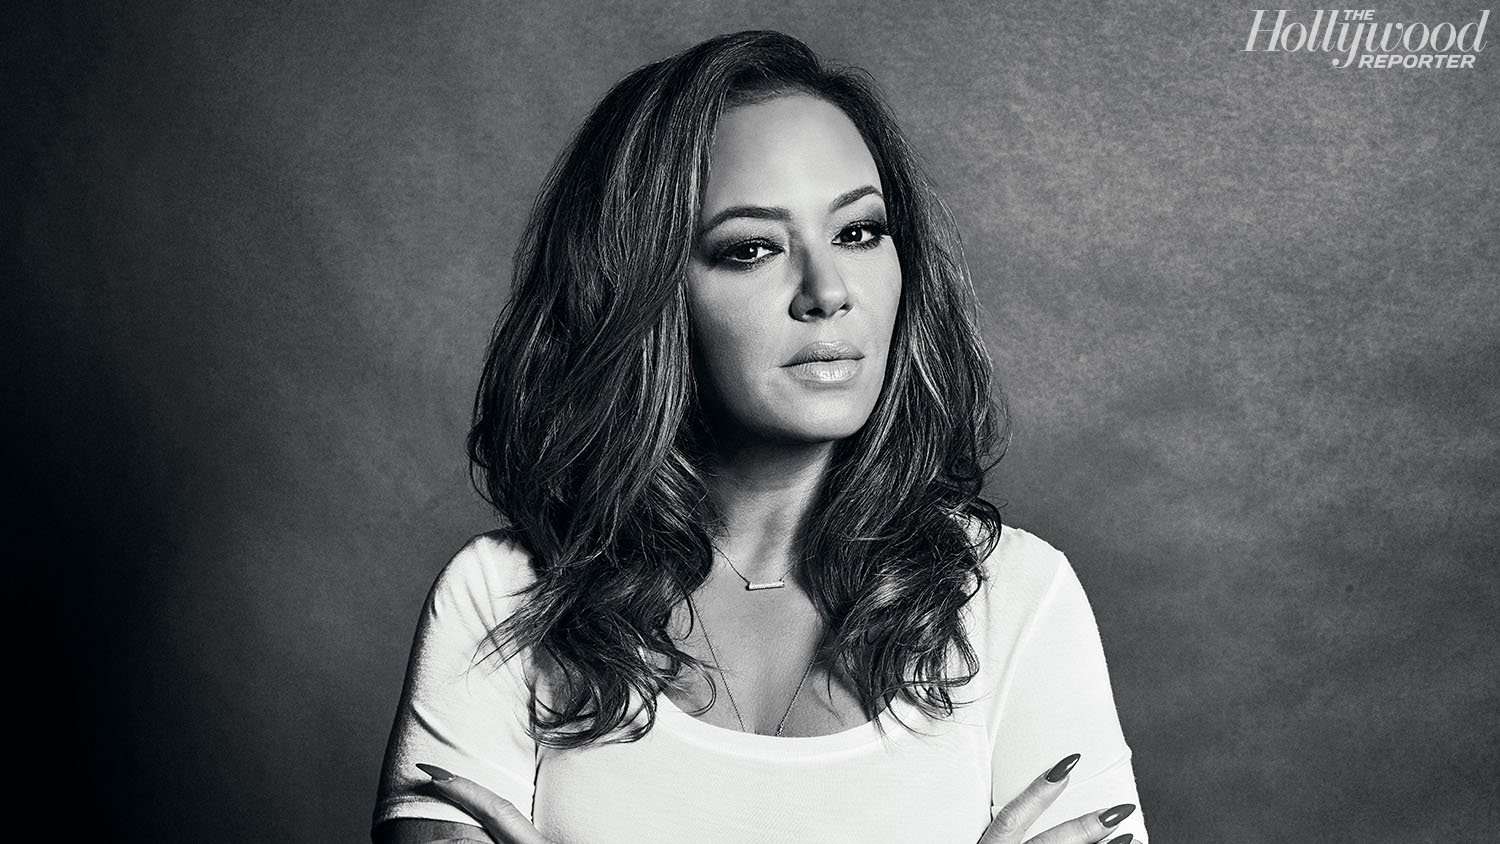 image for Leah Remini Doubles Down on Anti-Scientology Crusade: I Want a Federal Investigation